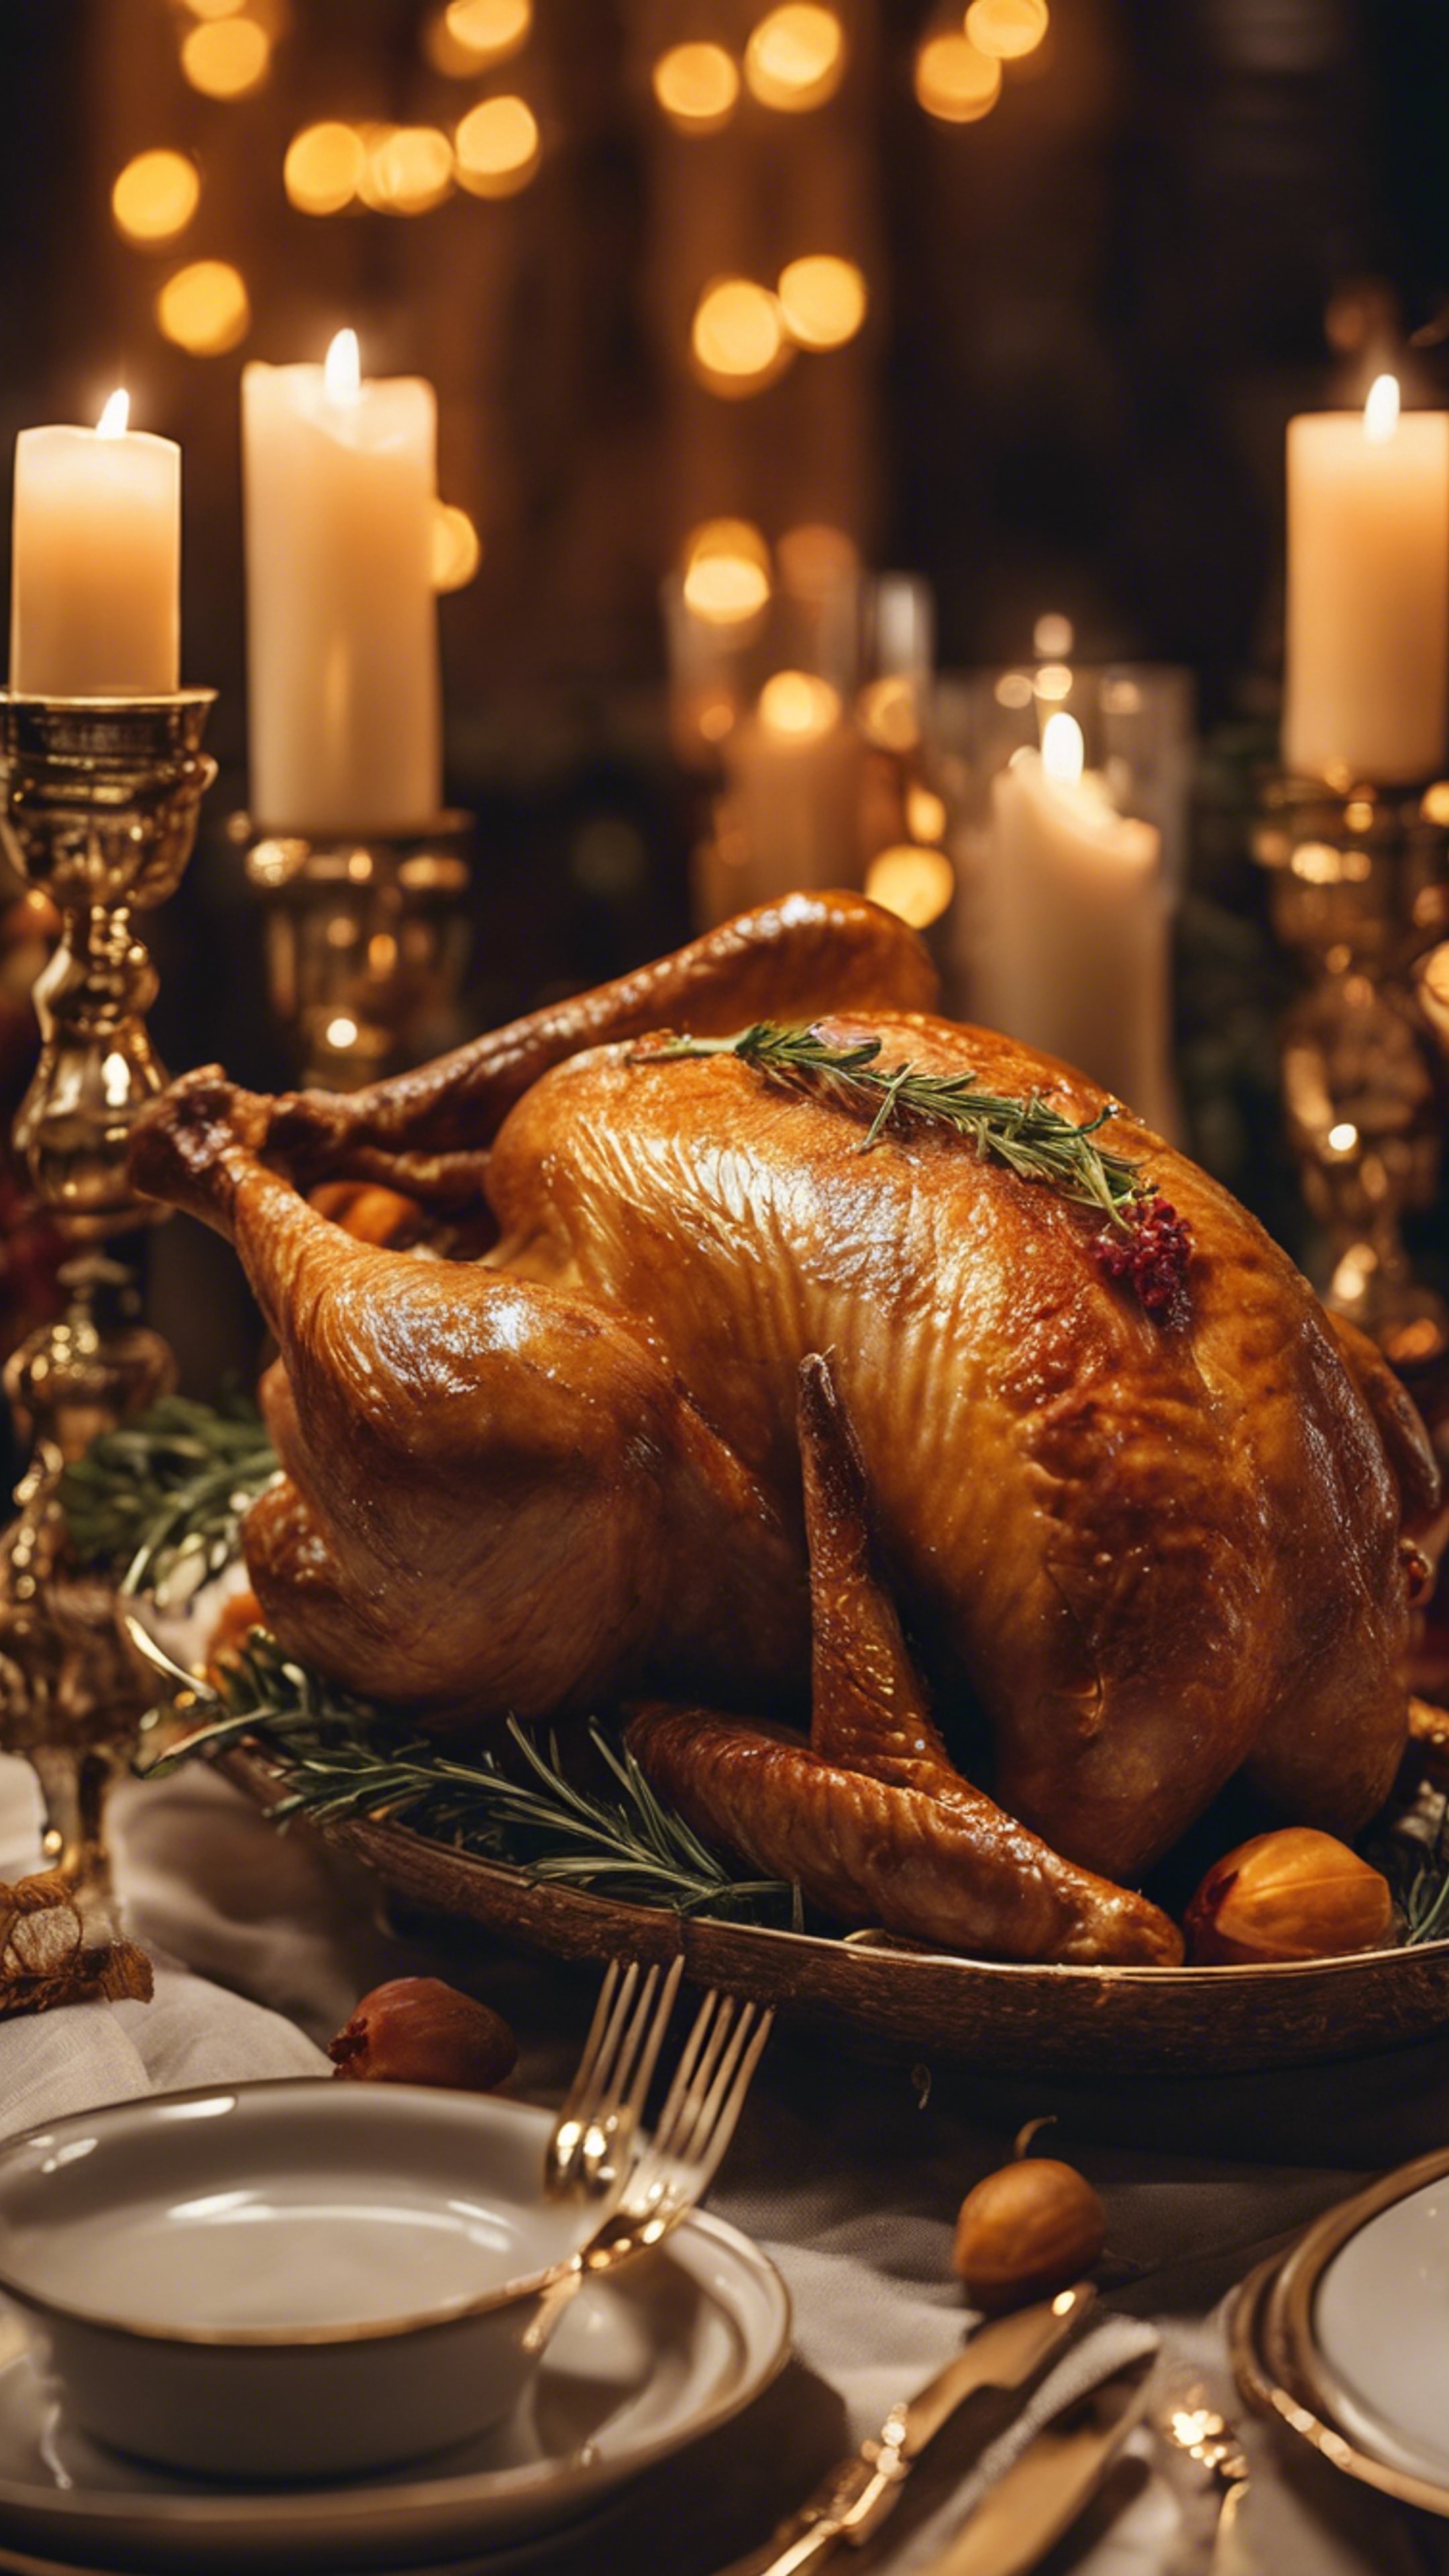 A golden turkey with crispy skin, garnished with rosemary sprigs, placed on a beautifully decorated Thanksgiving table surrounded by candlelight. Wallpaper[a315f5af56014eb0b6e0]